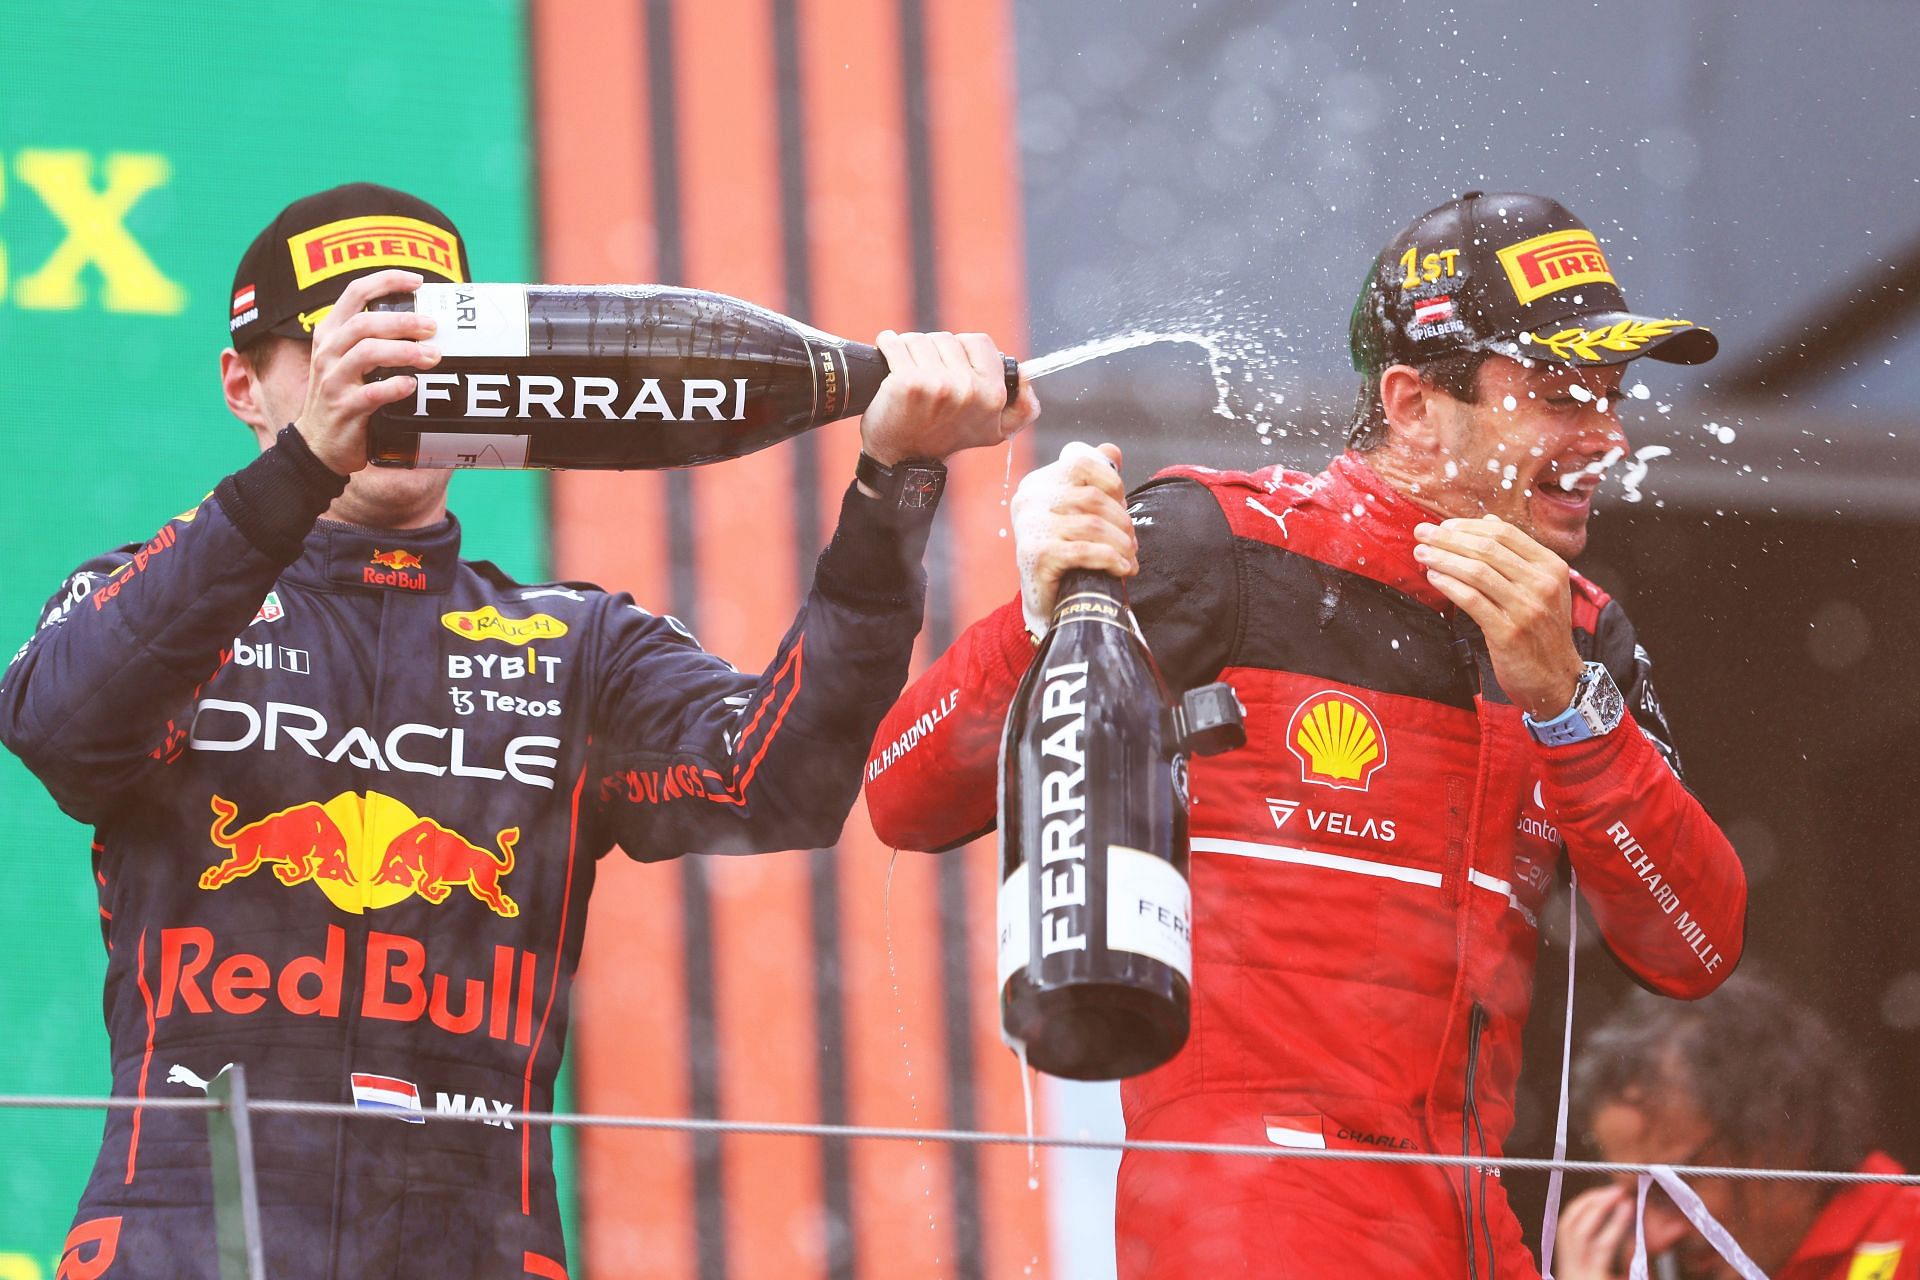 Leclerc and Verstappen have maintained a cordial relationship this season